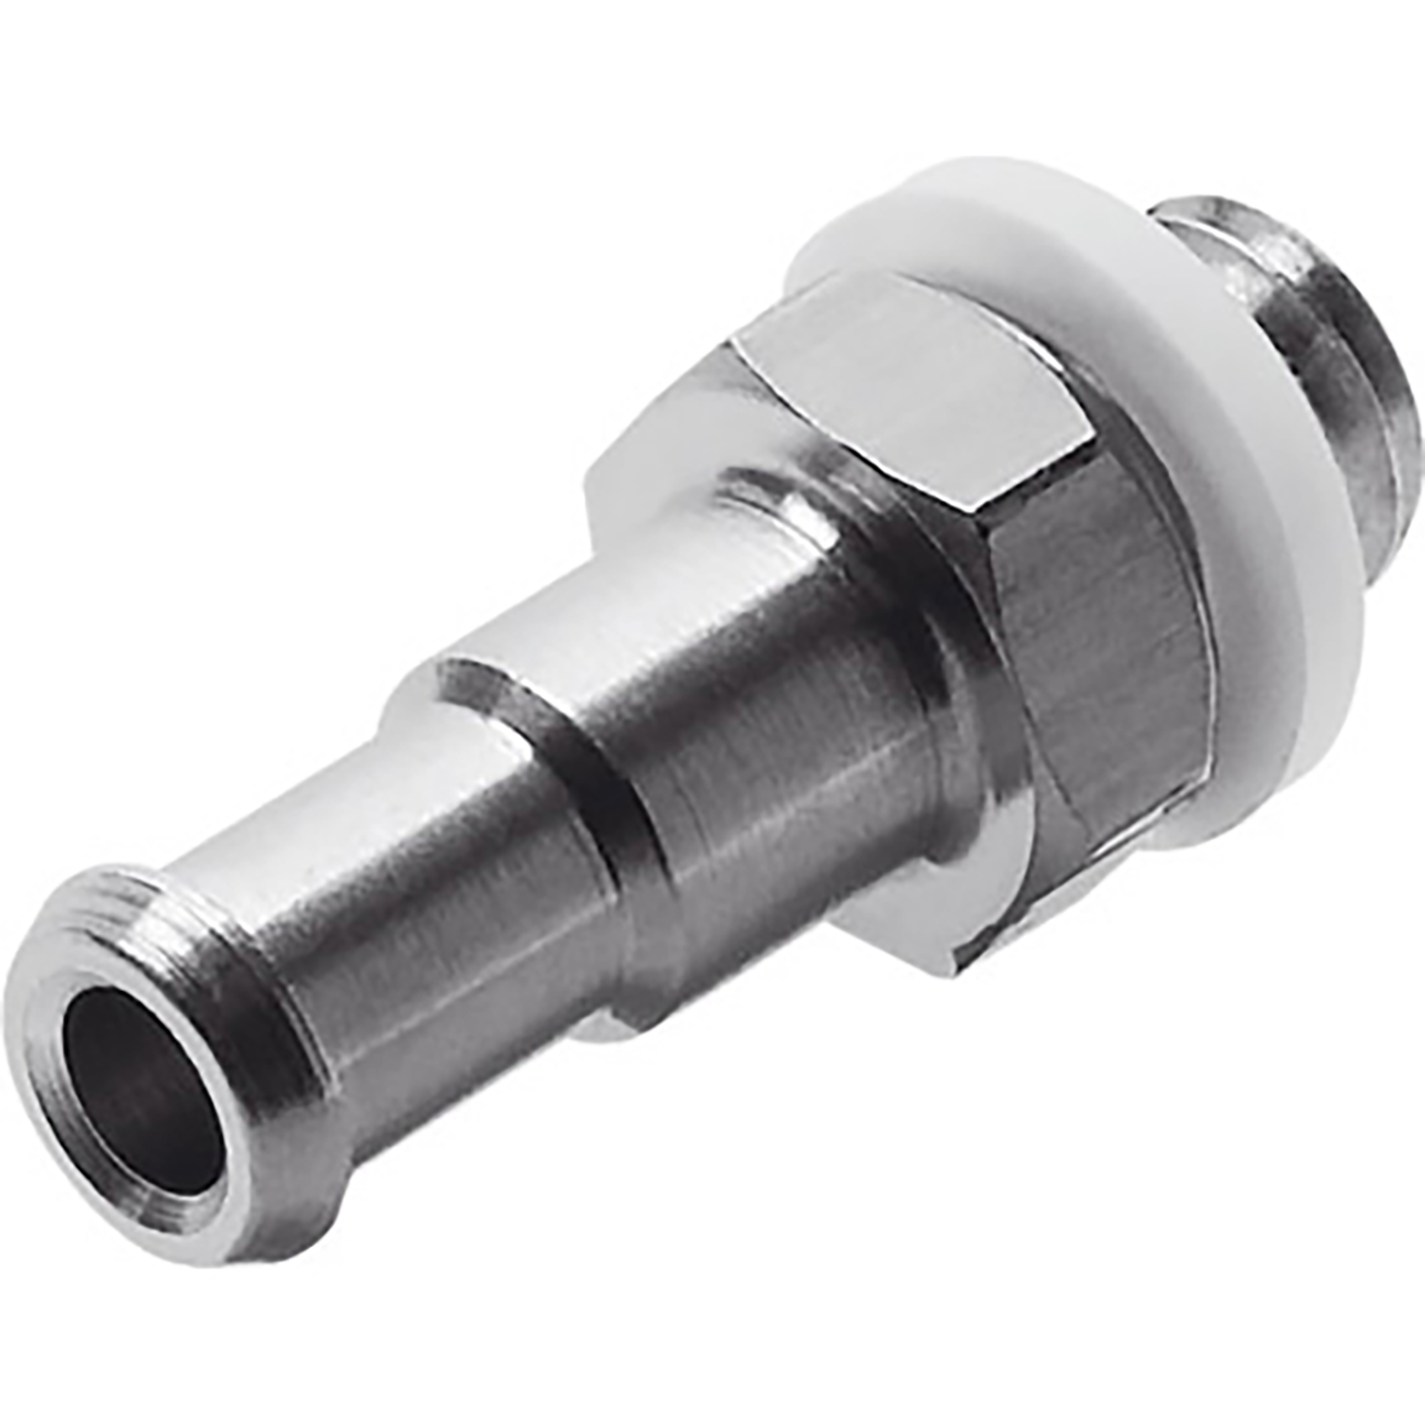 N-M5-PK-4 BARBED FITTING